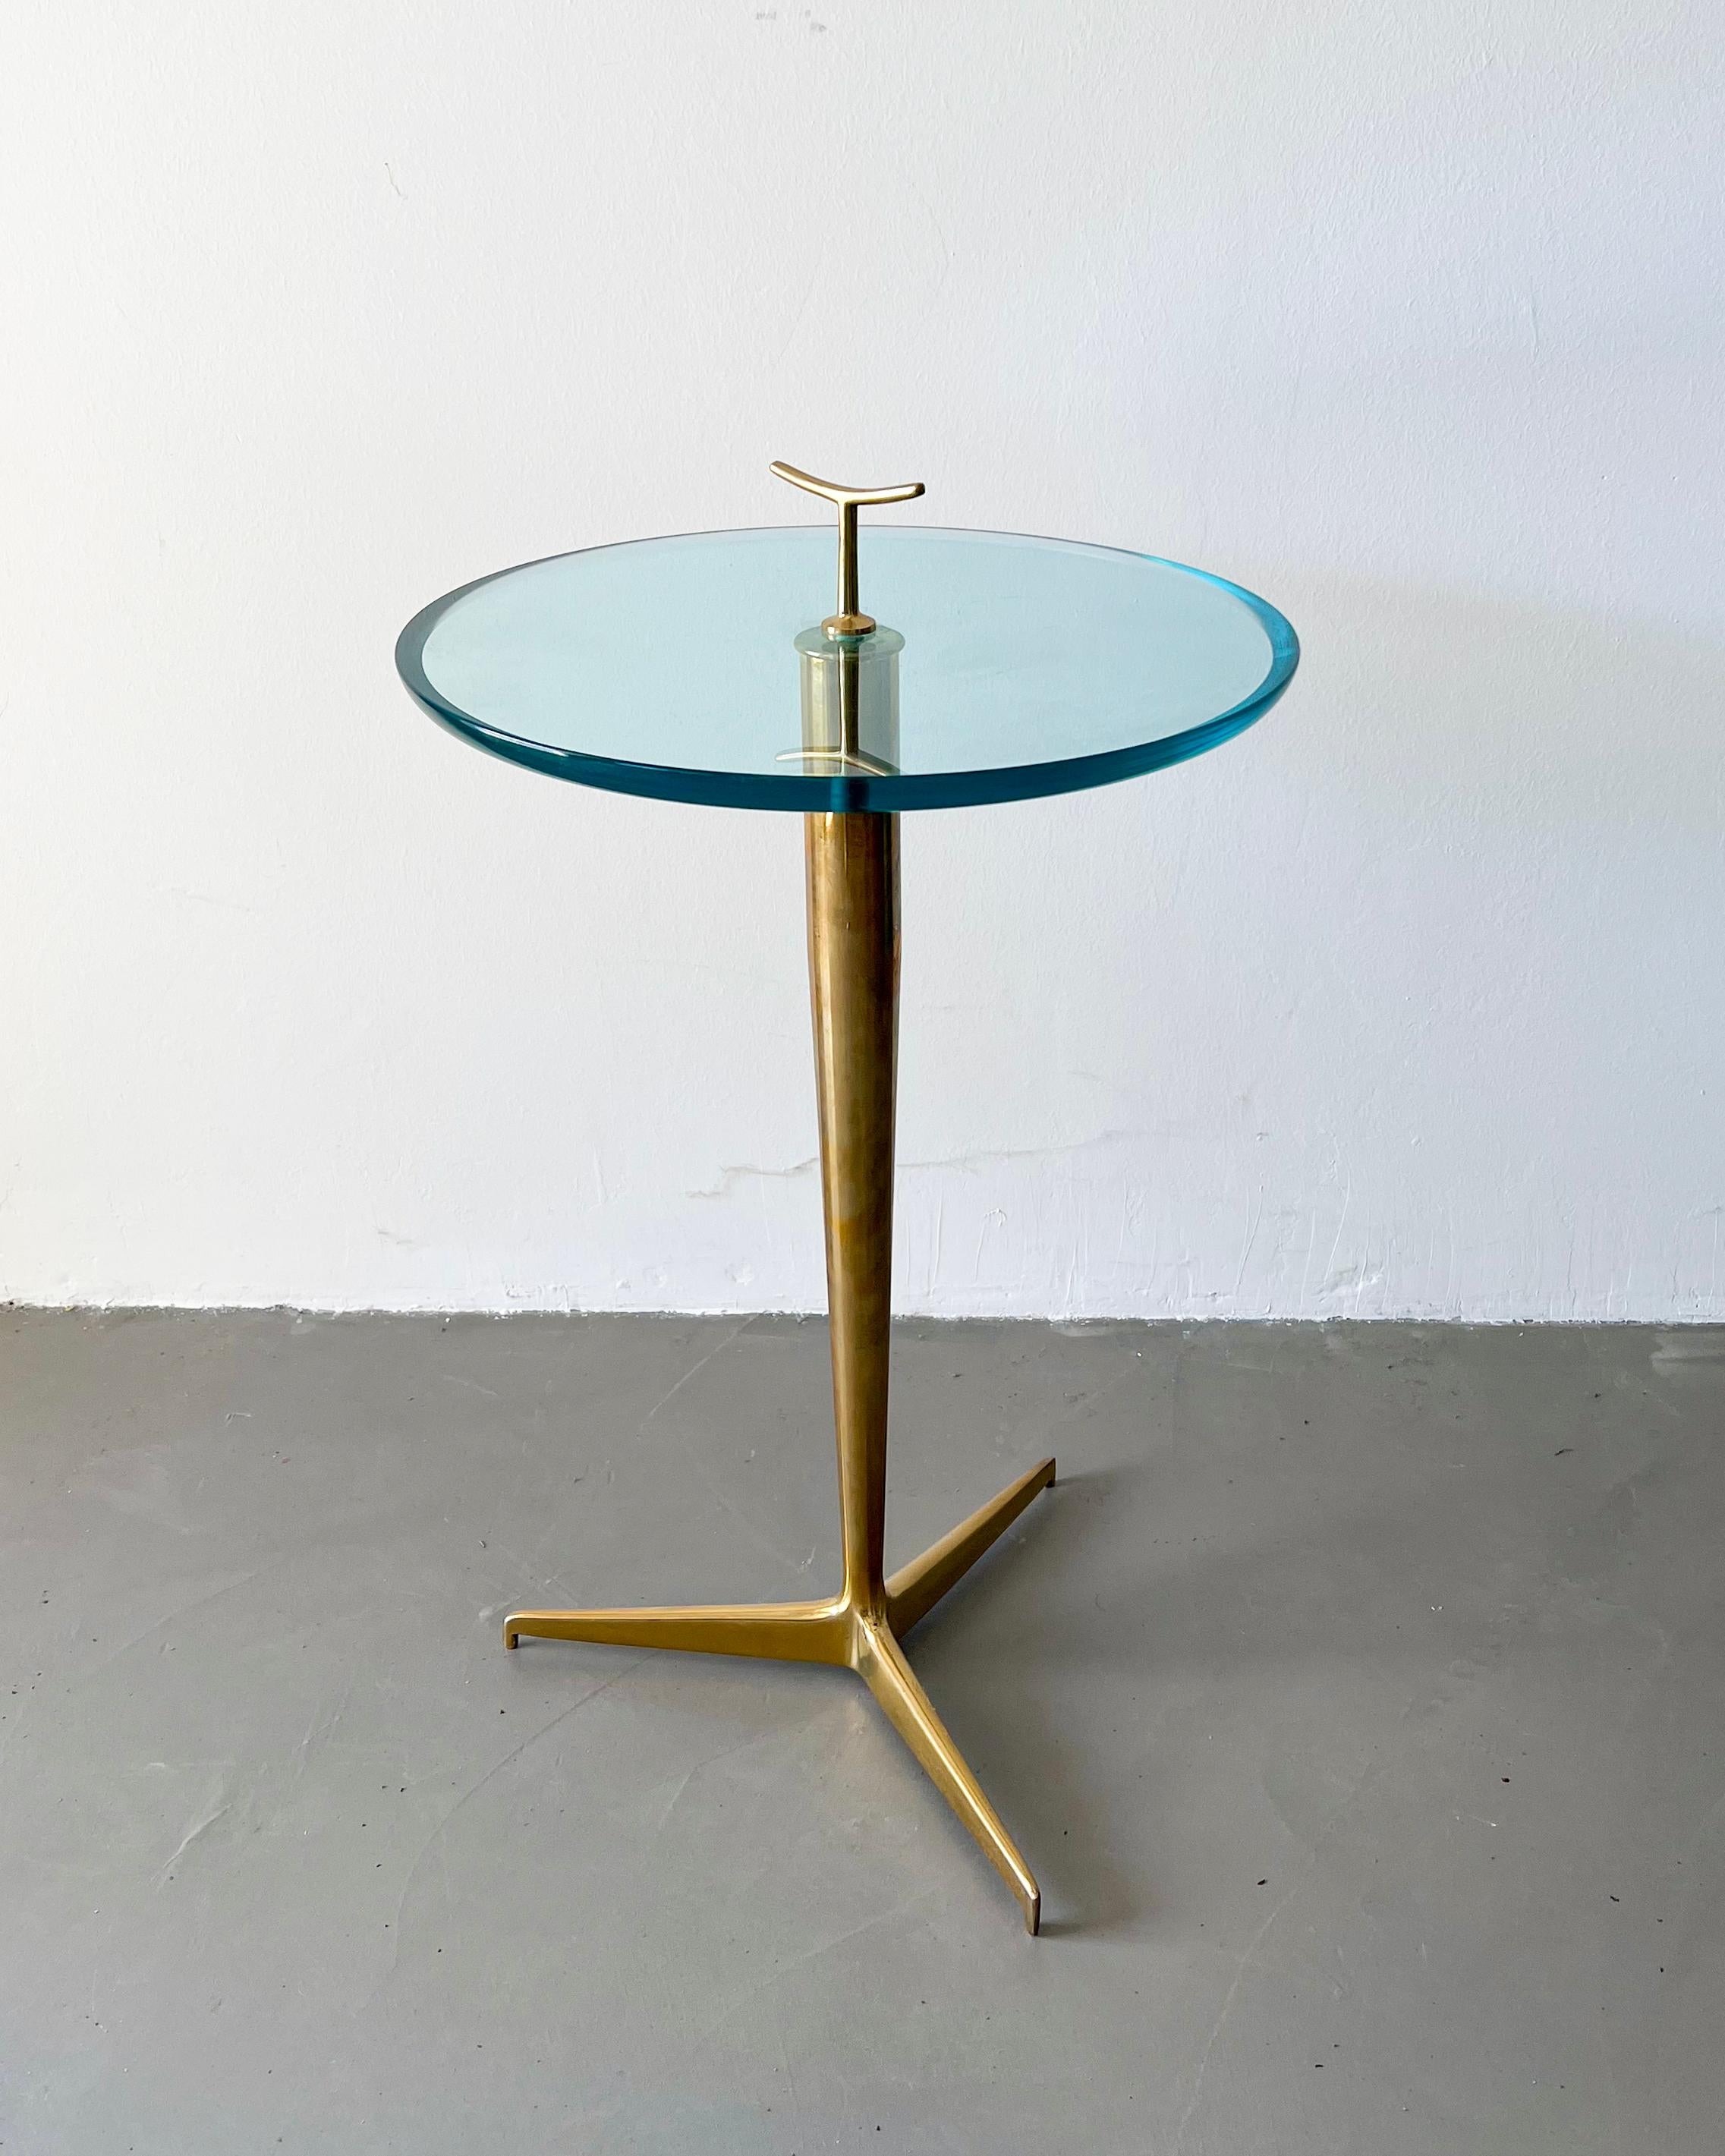 Vintage Italian midcentury side table in brass and glass by Giuseppe Ostuni.

The piece, preserved in stunning original condition, is a wonderful and sculptural side table by Italian designer Giuseppe Ostuni. The color of the glass top and the